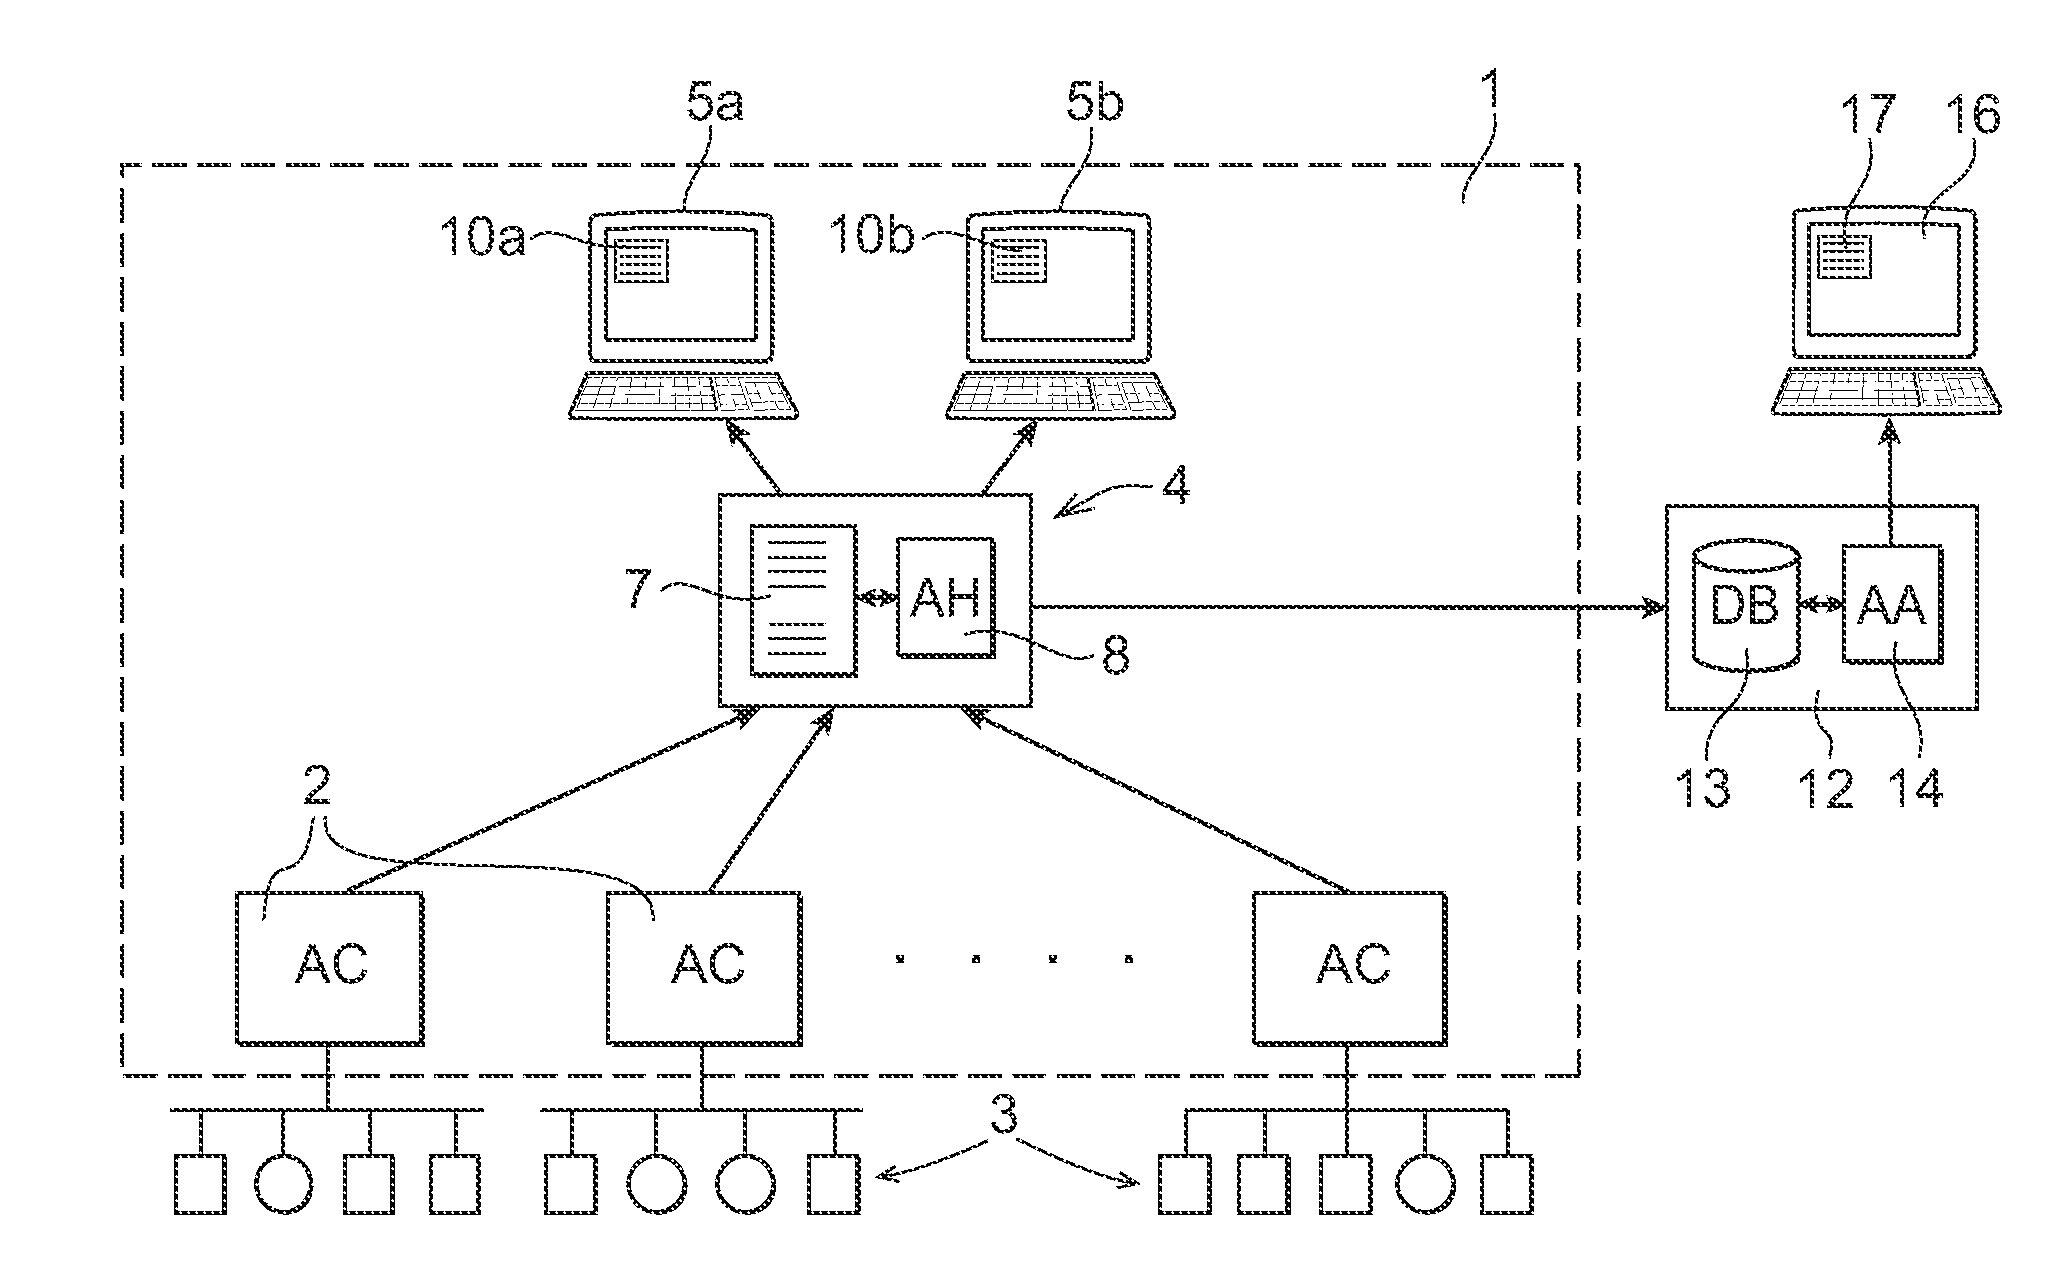 Alarm analysis system and a method for providing statistics on alarms from a process control system